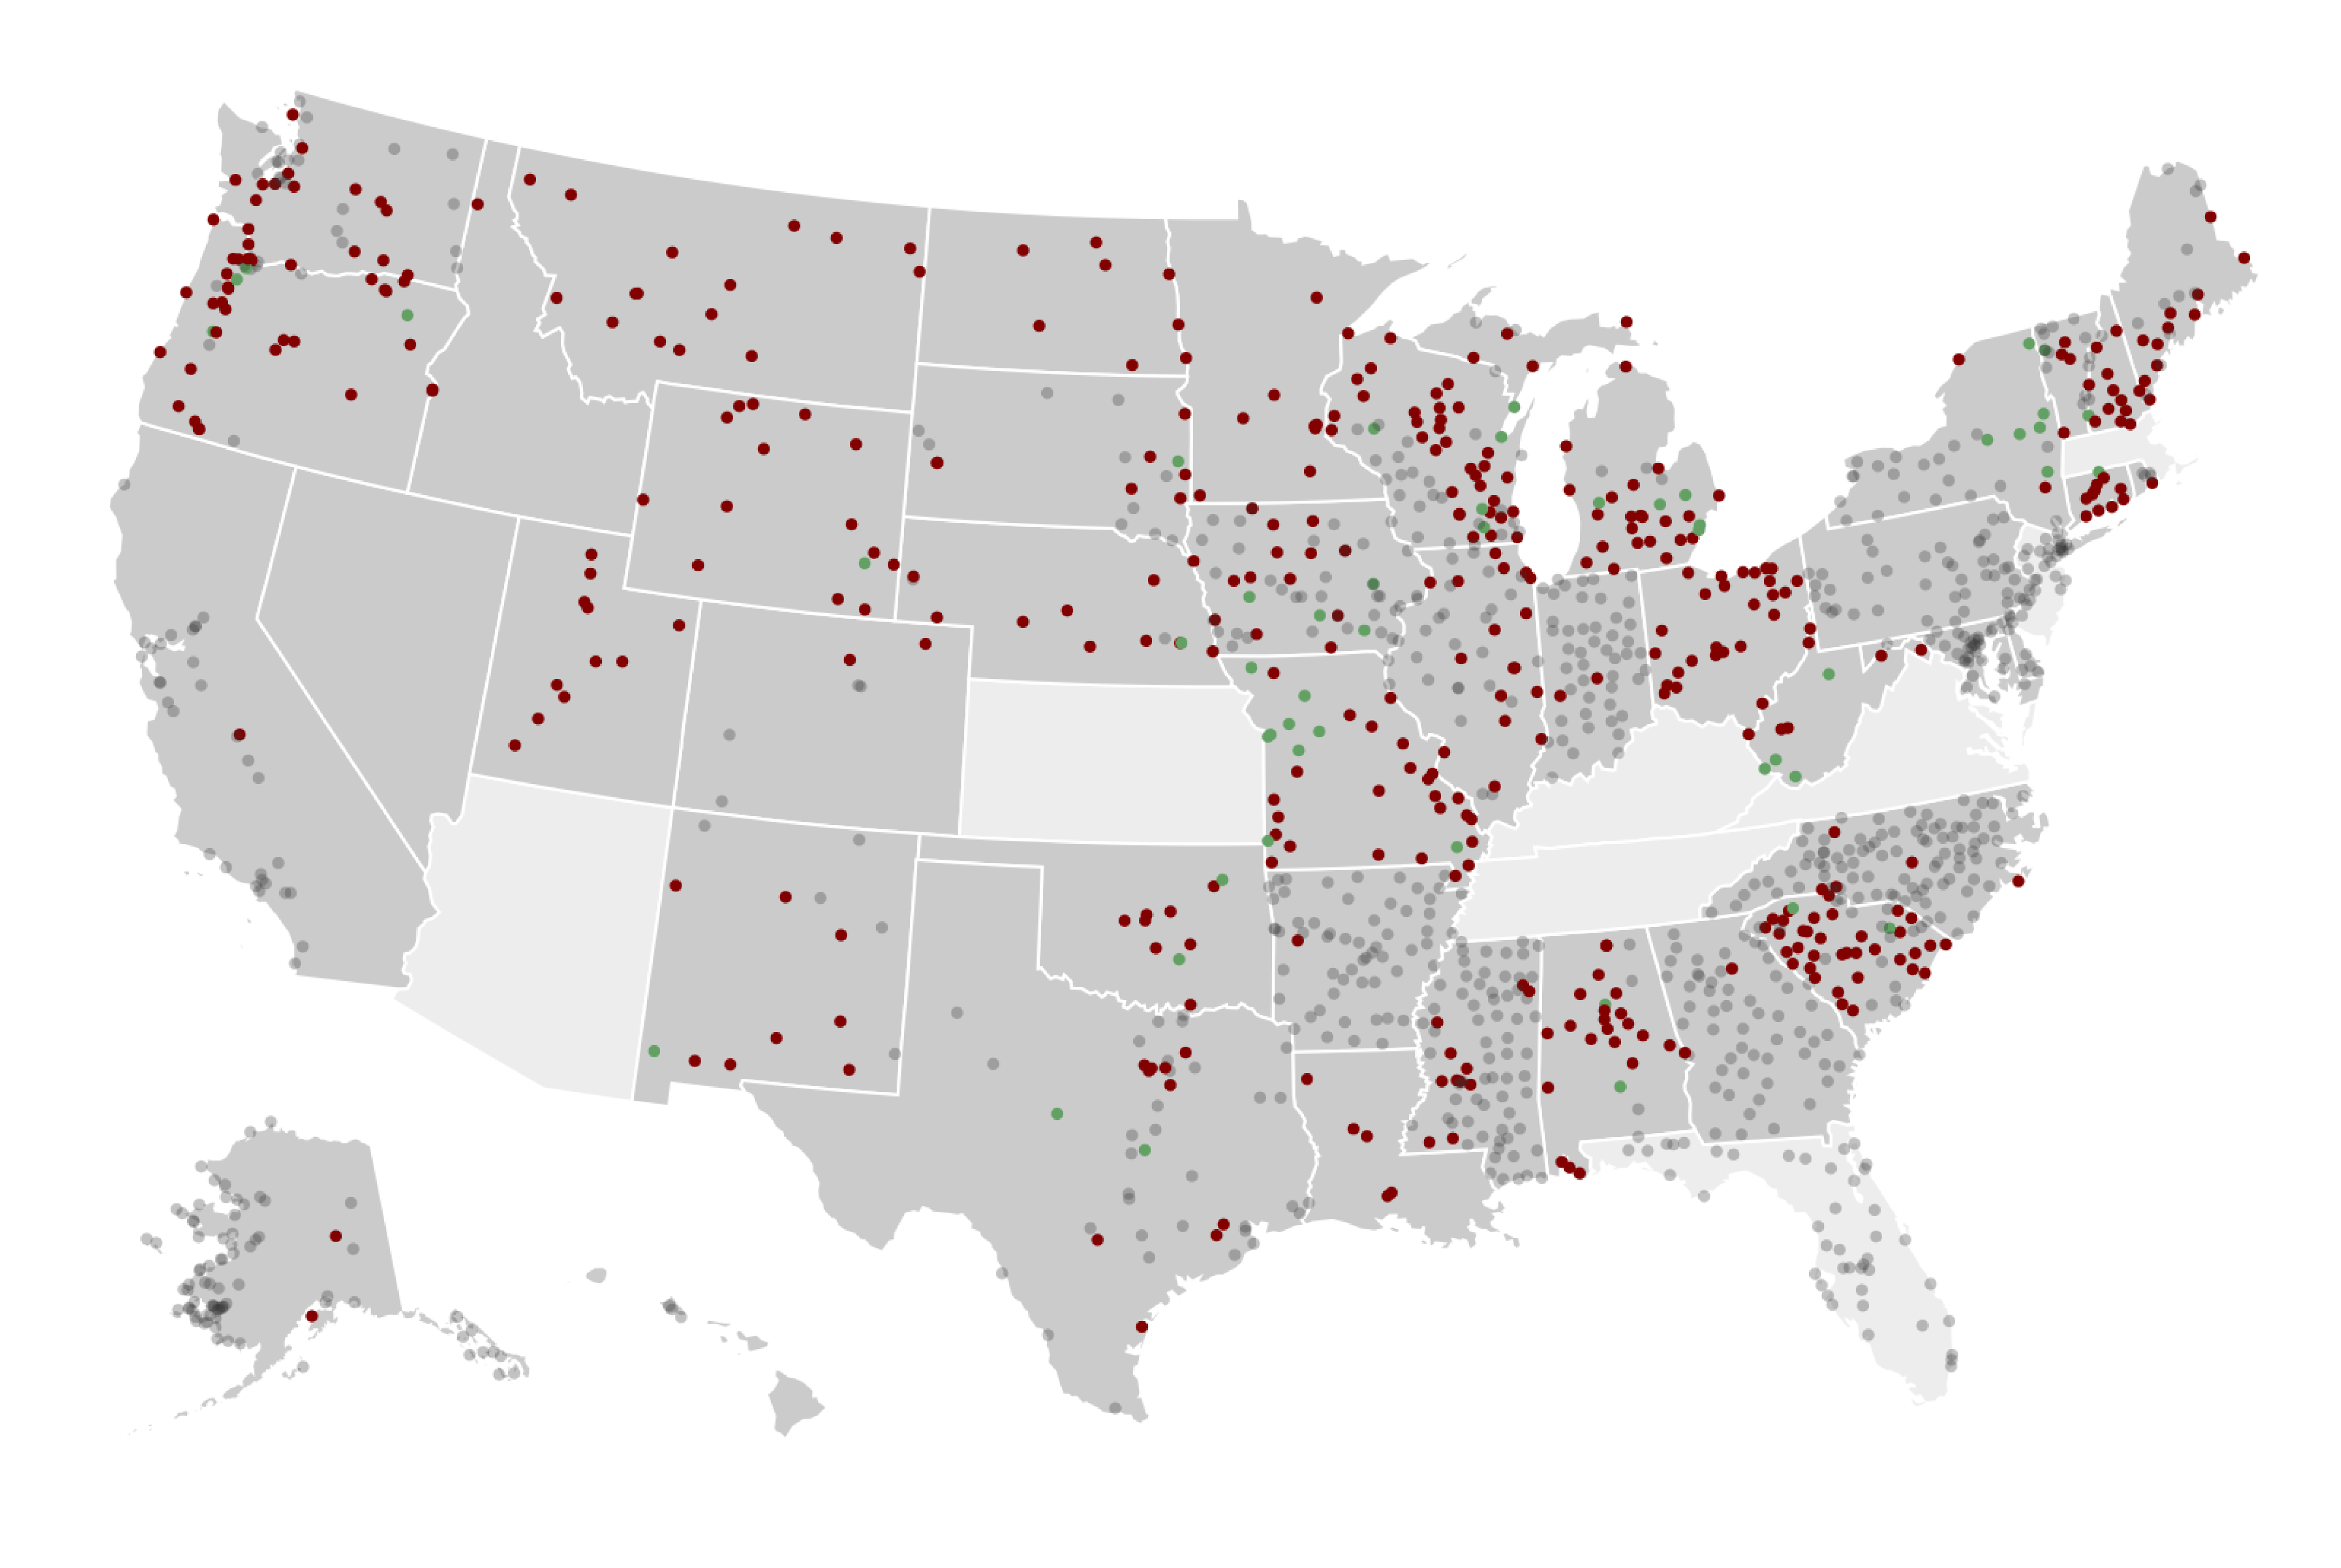 A gray and white map of the United States with red, green, and gray dots that encode where armories are located and whether lead was found there (red if so, green if not, and gray if the data is available).